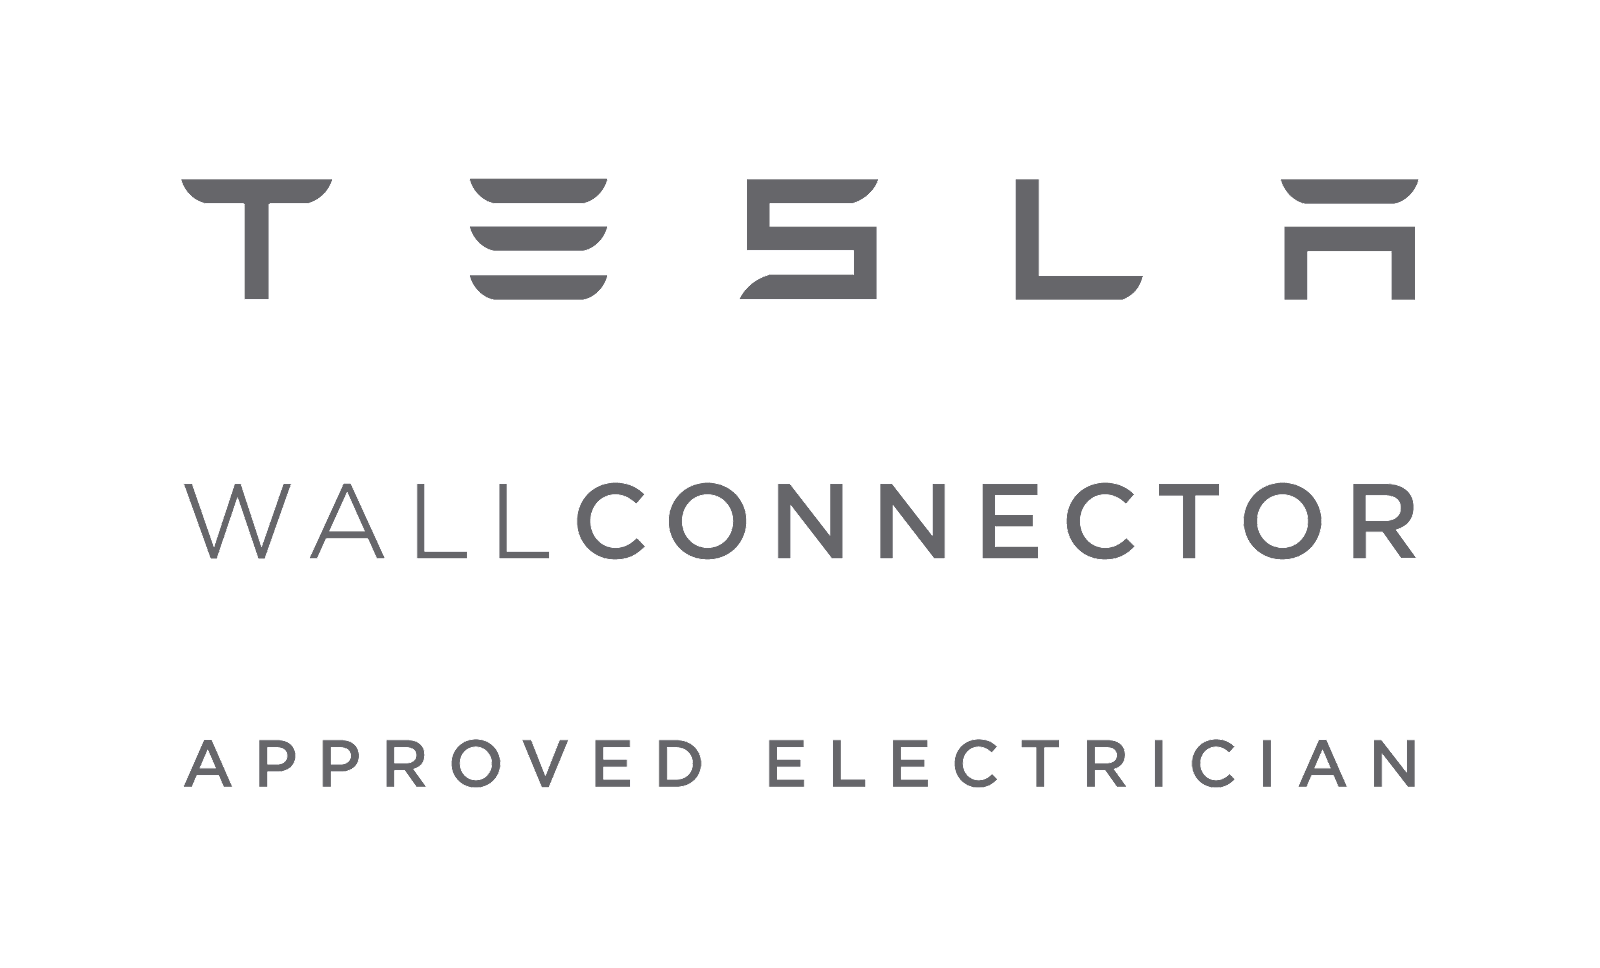 A tesla wall connector approved electrician logo on a white background.